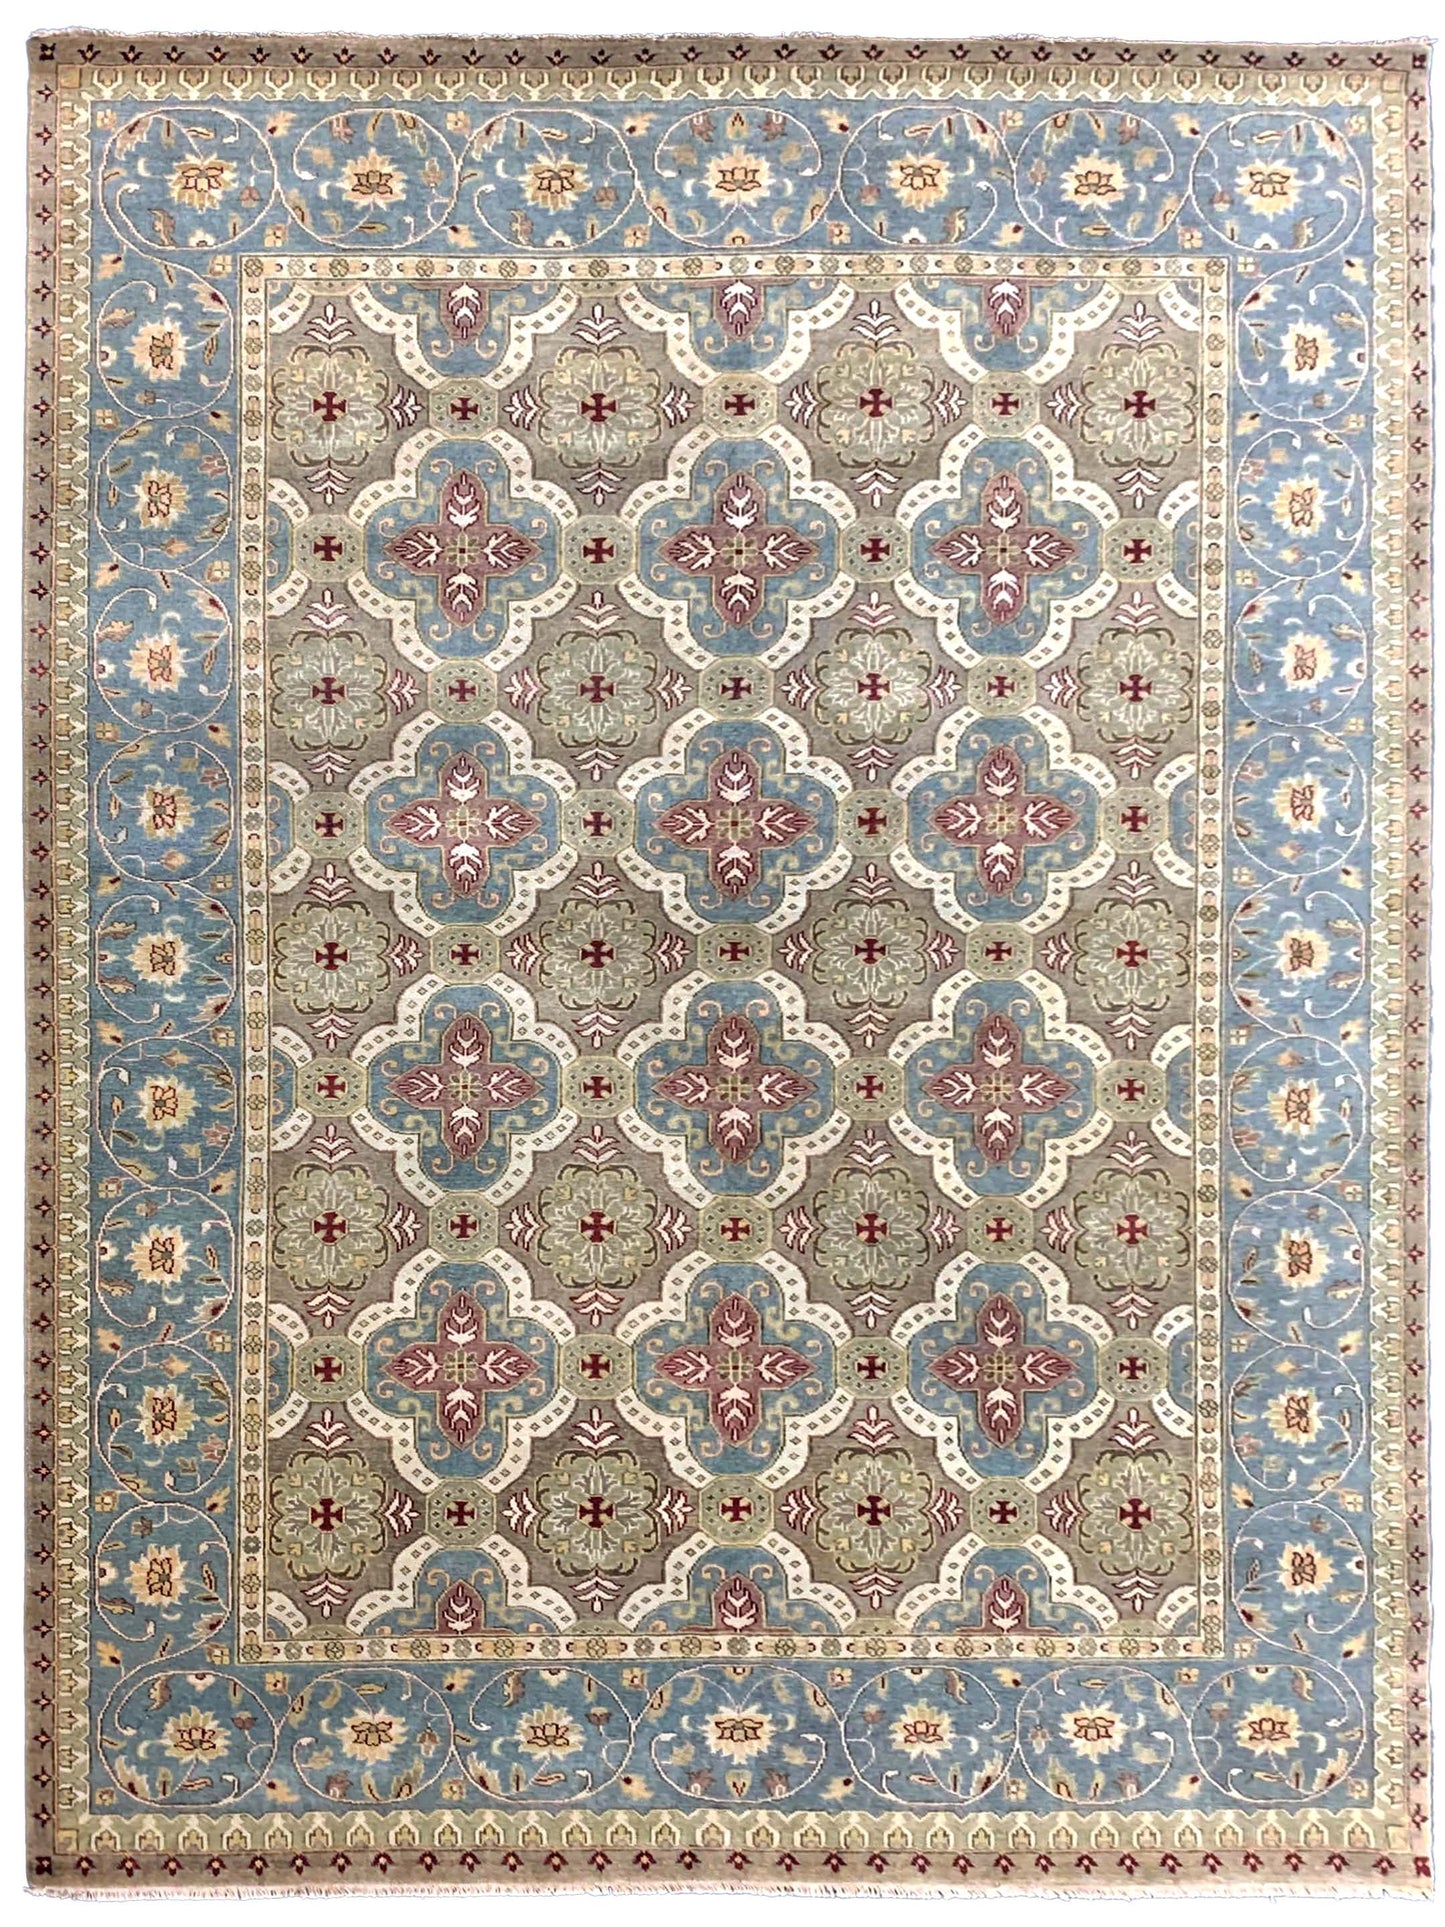 Artisan Cameron CB-202 Lt.Blue Traditional Knotted Rug